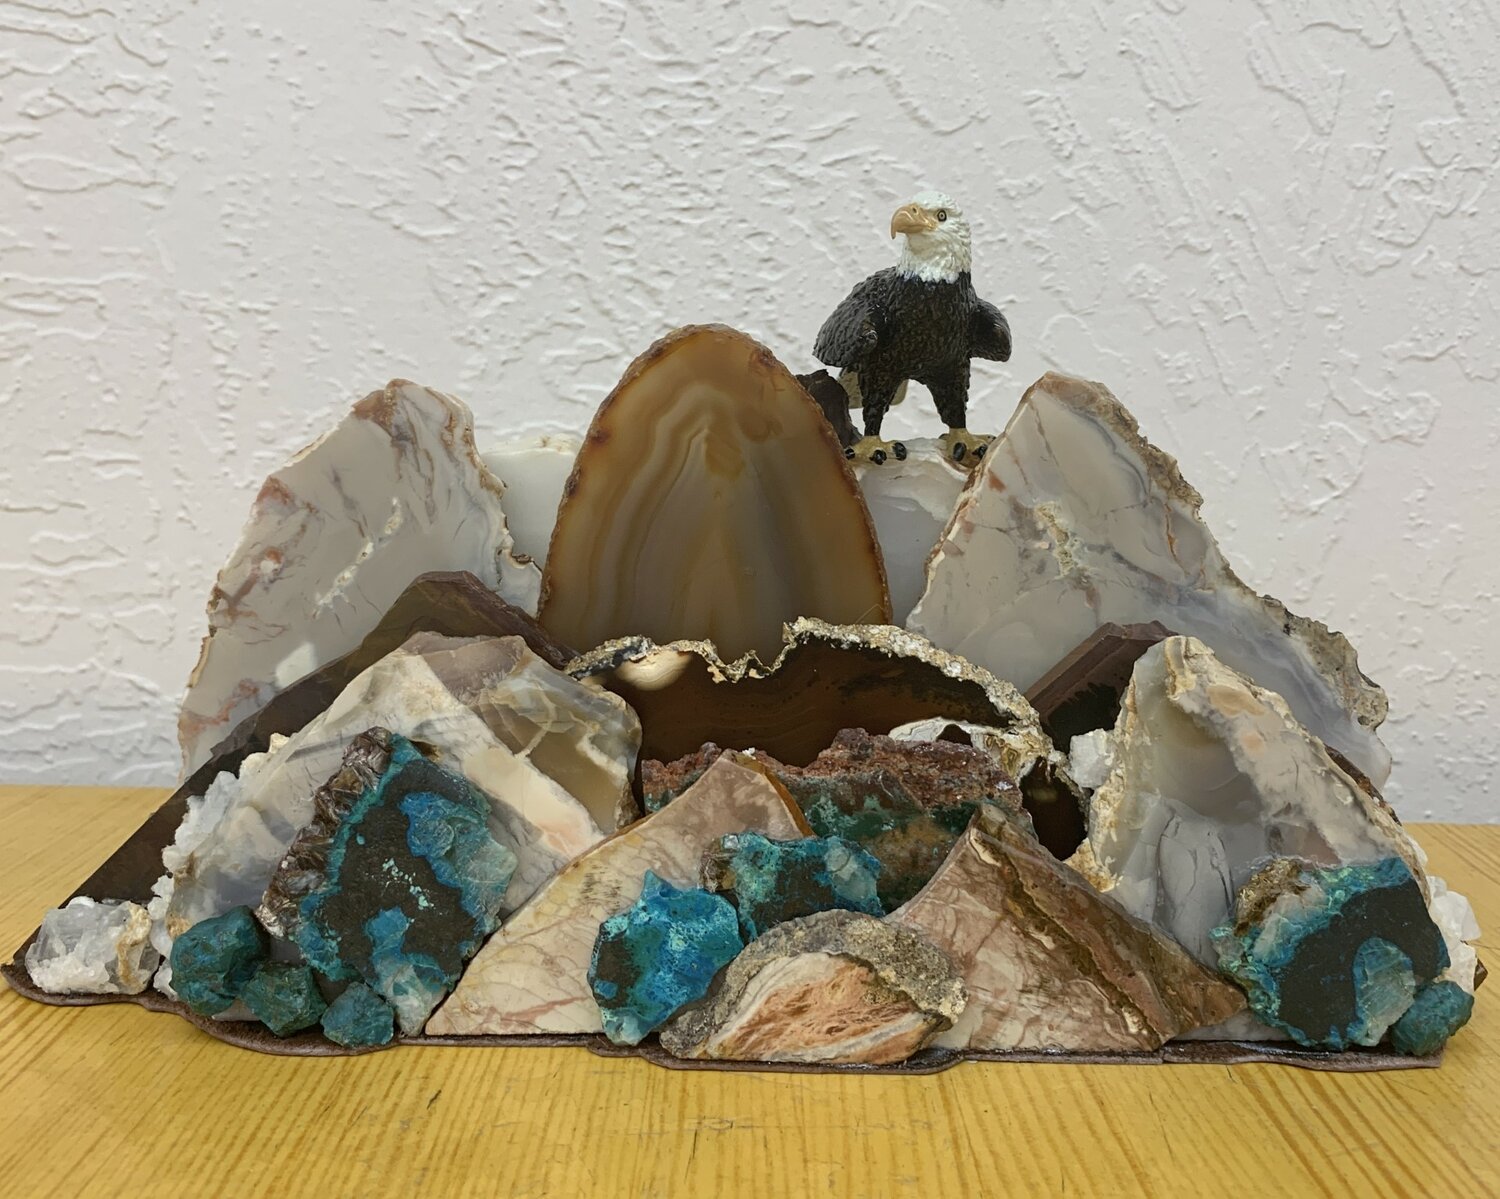 Pictured, the Lapidary Club’s window display in November showcased rock slabs and stones artistically combined to form mountain scenery.